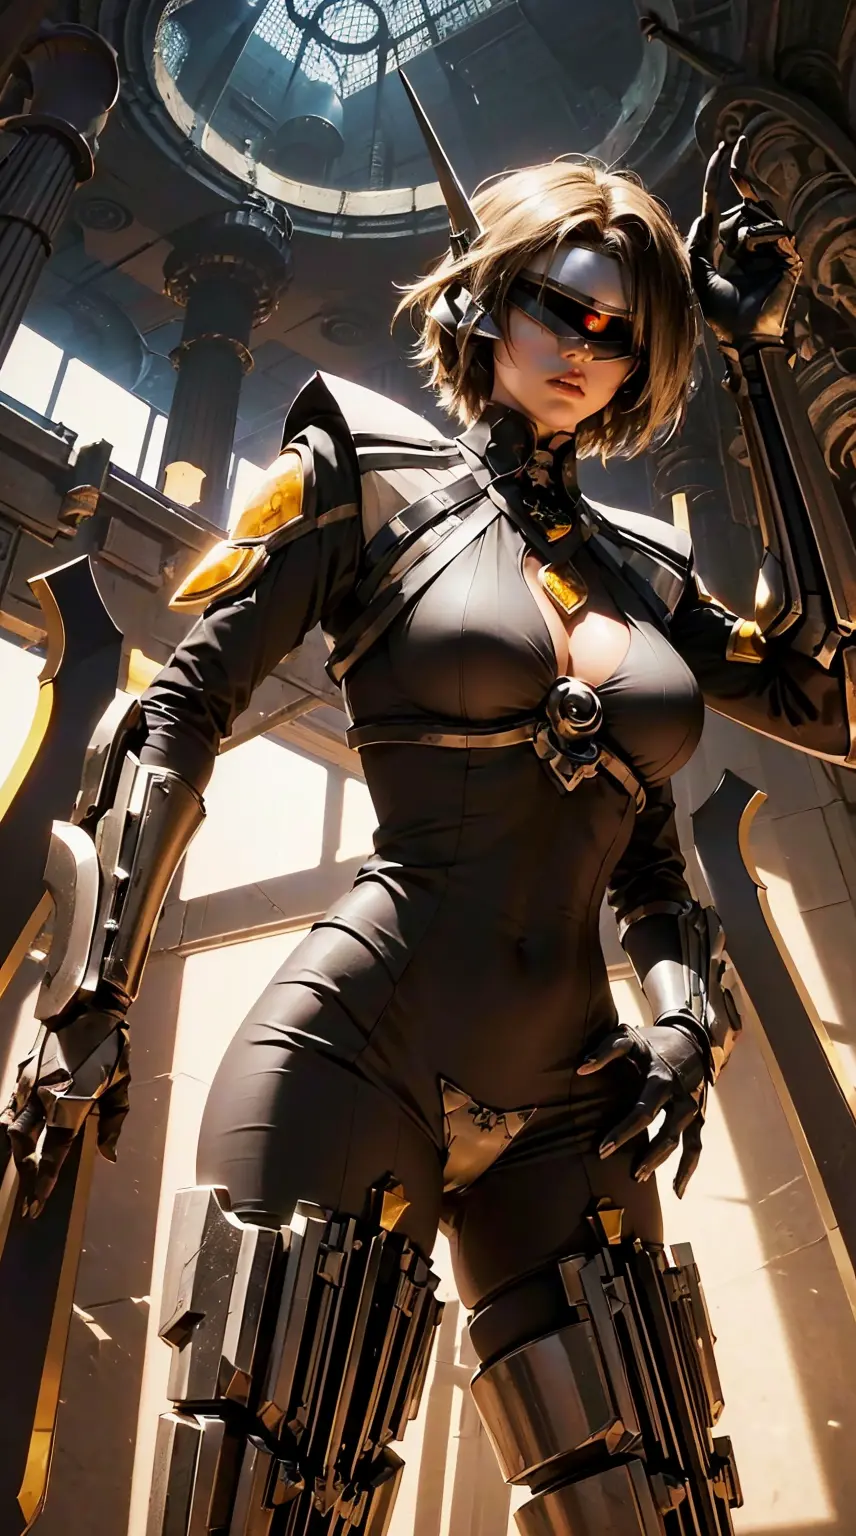 1girl, (detailed eyes, eye patch), (detailed lips), (intense expression), (exquisite face), (mechanical, futuristic armor), (sum...